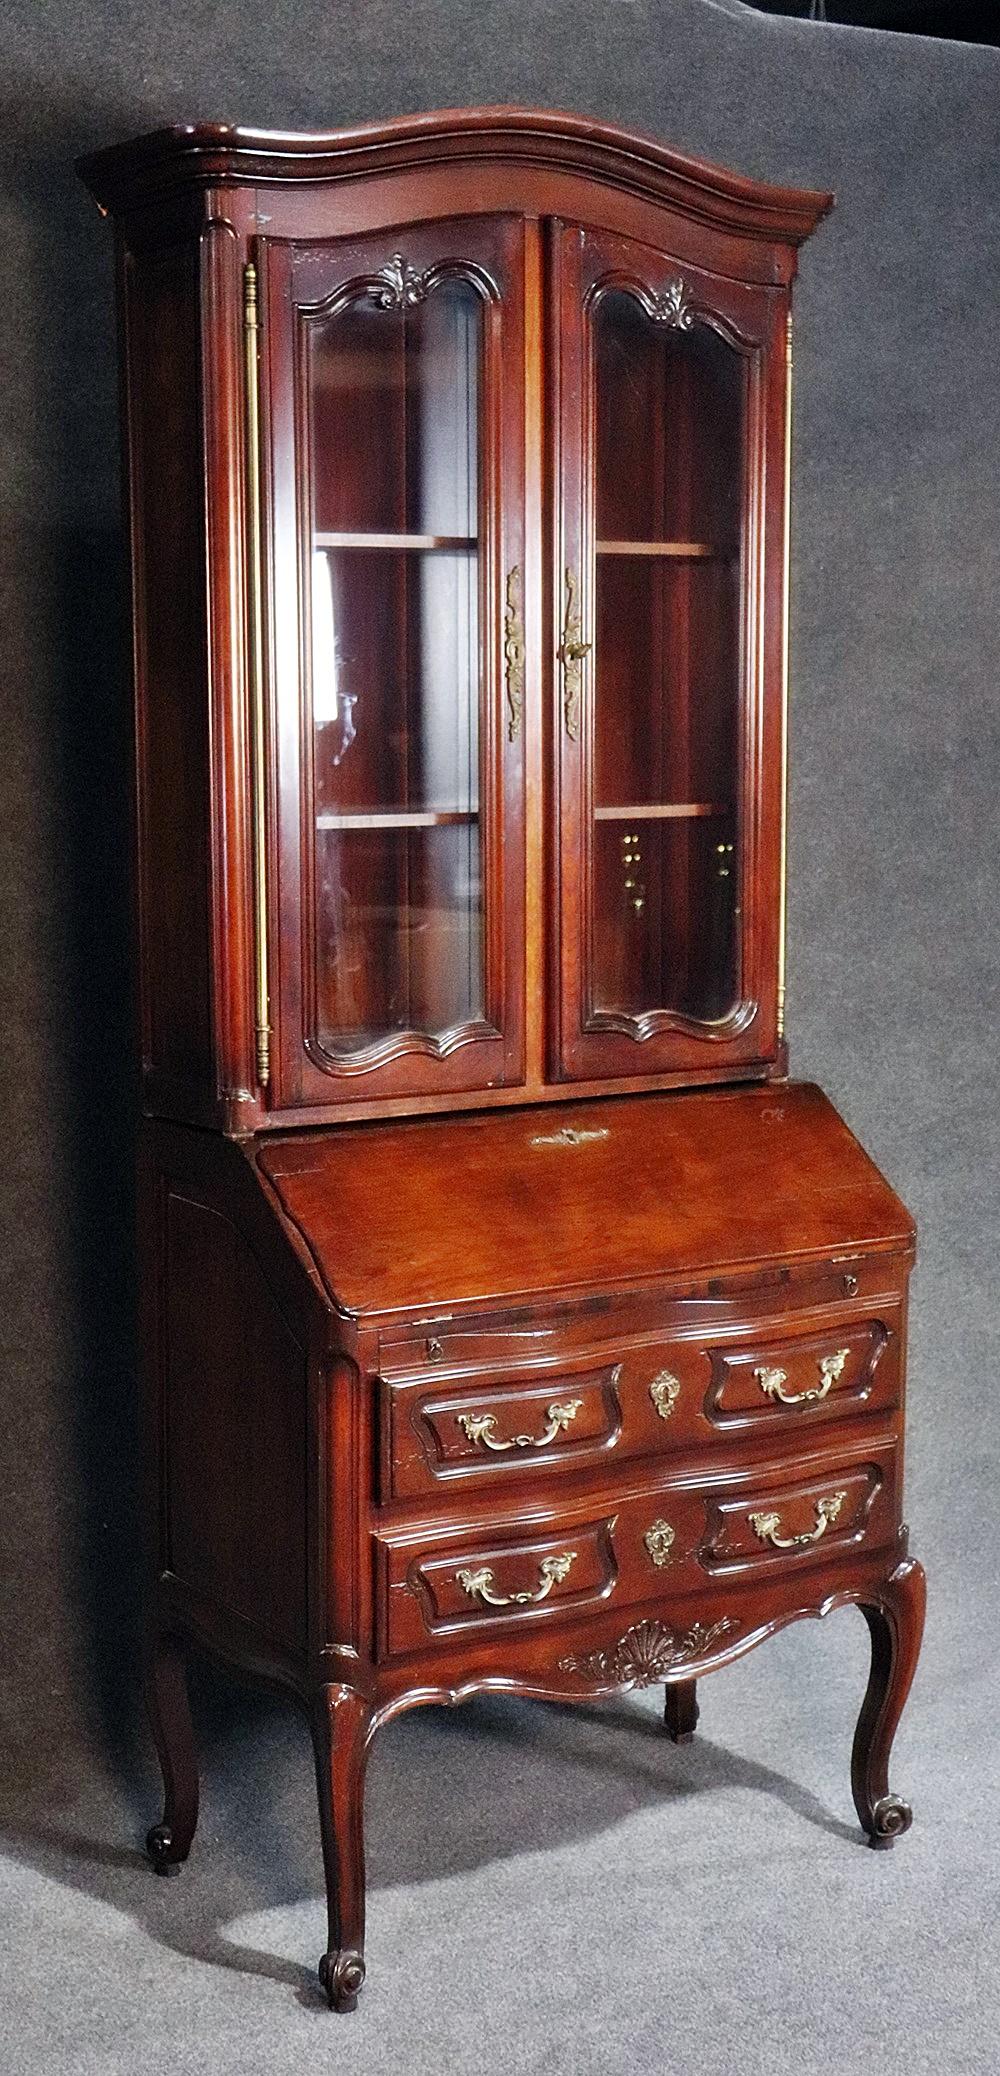 20th Century Aufrray style French Louis XV Style Walnut Secretary Desk with Bookcase Top